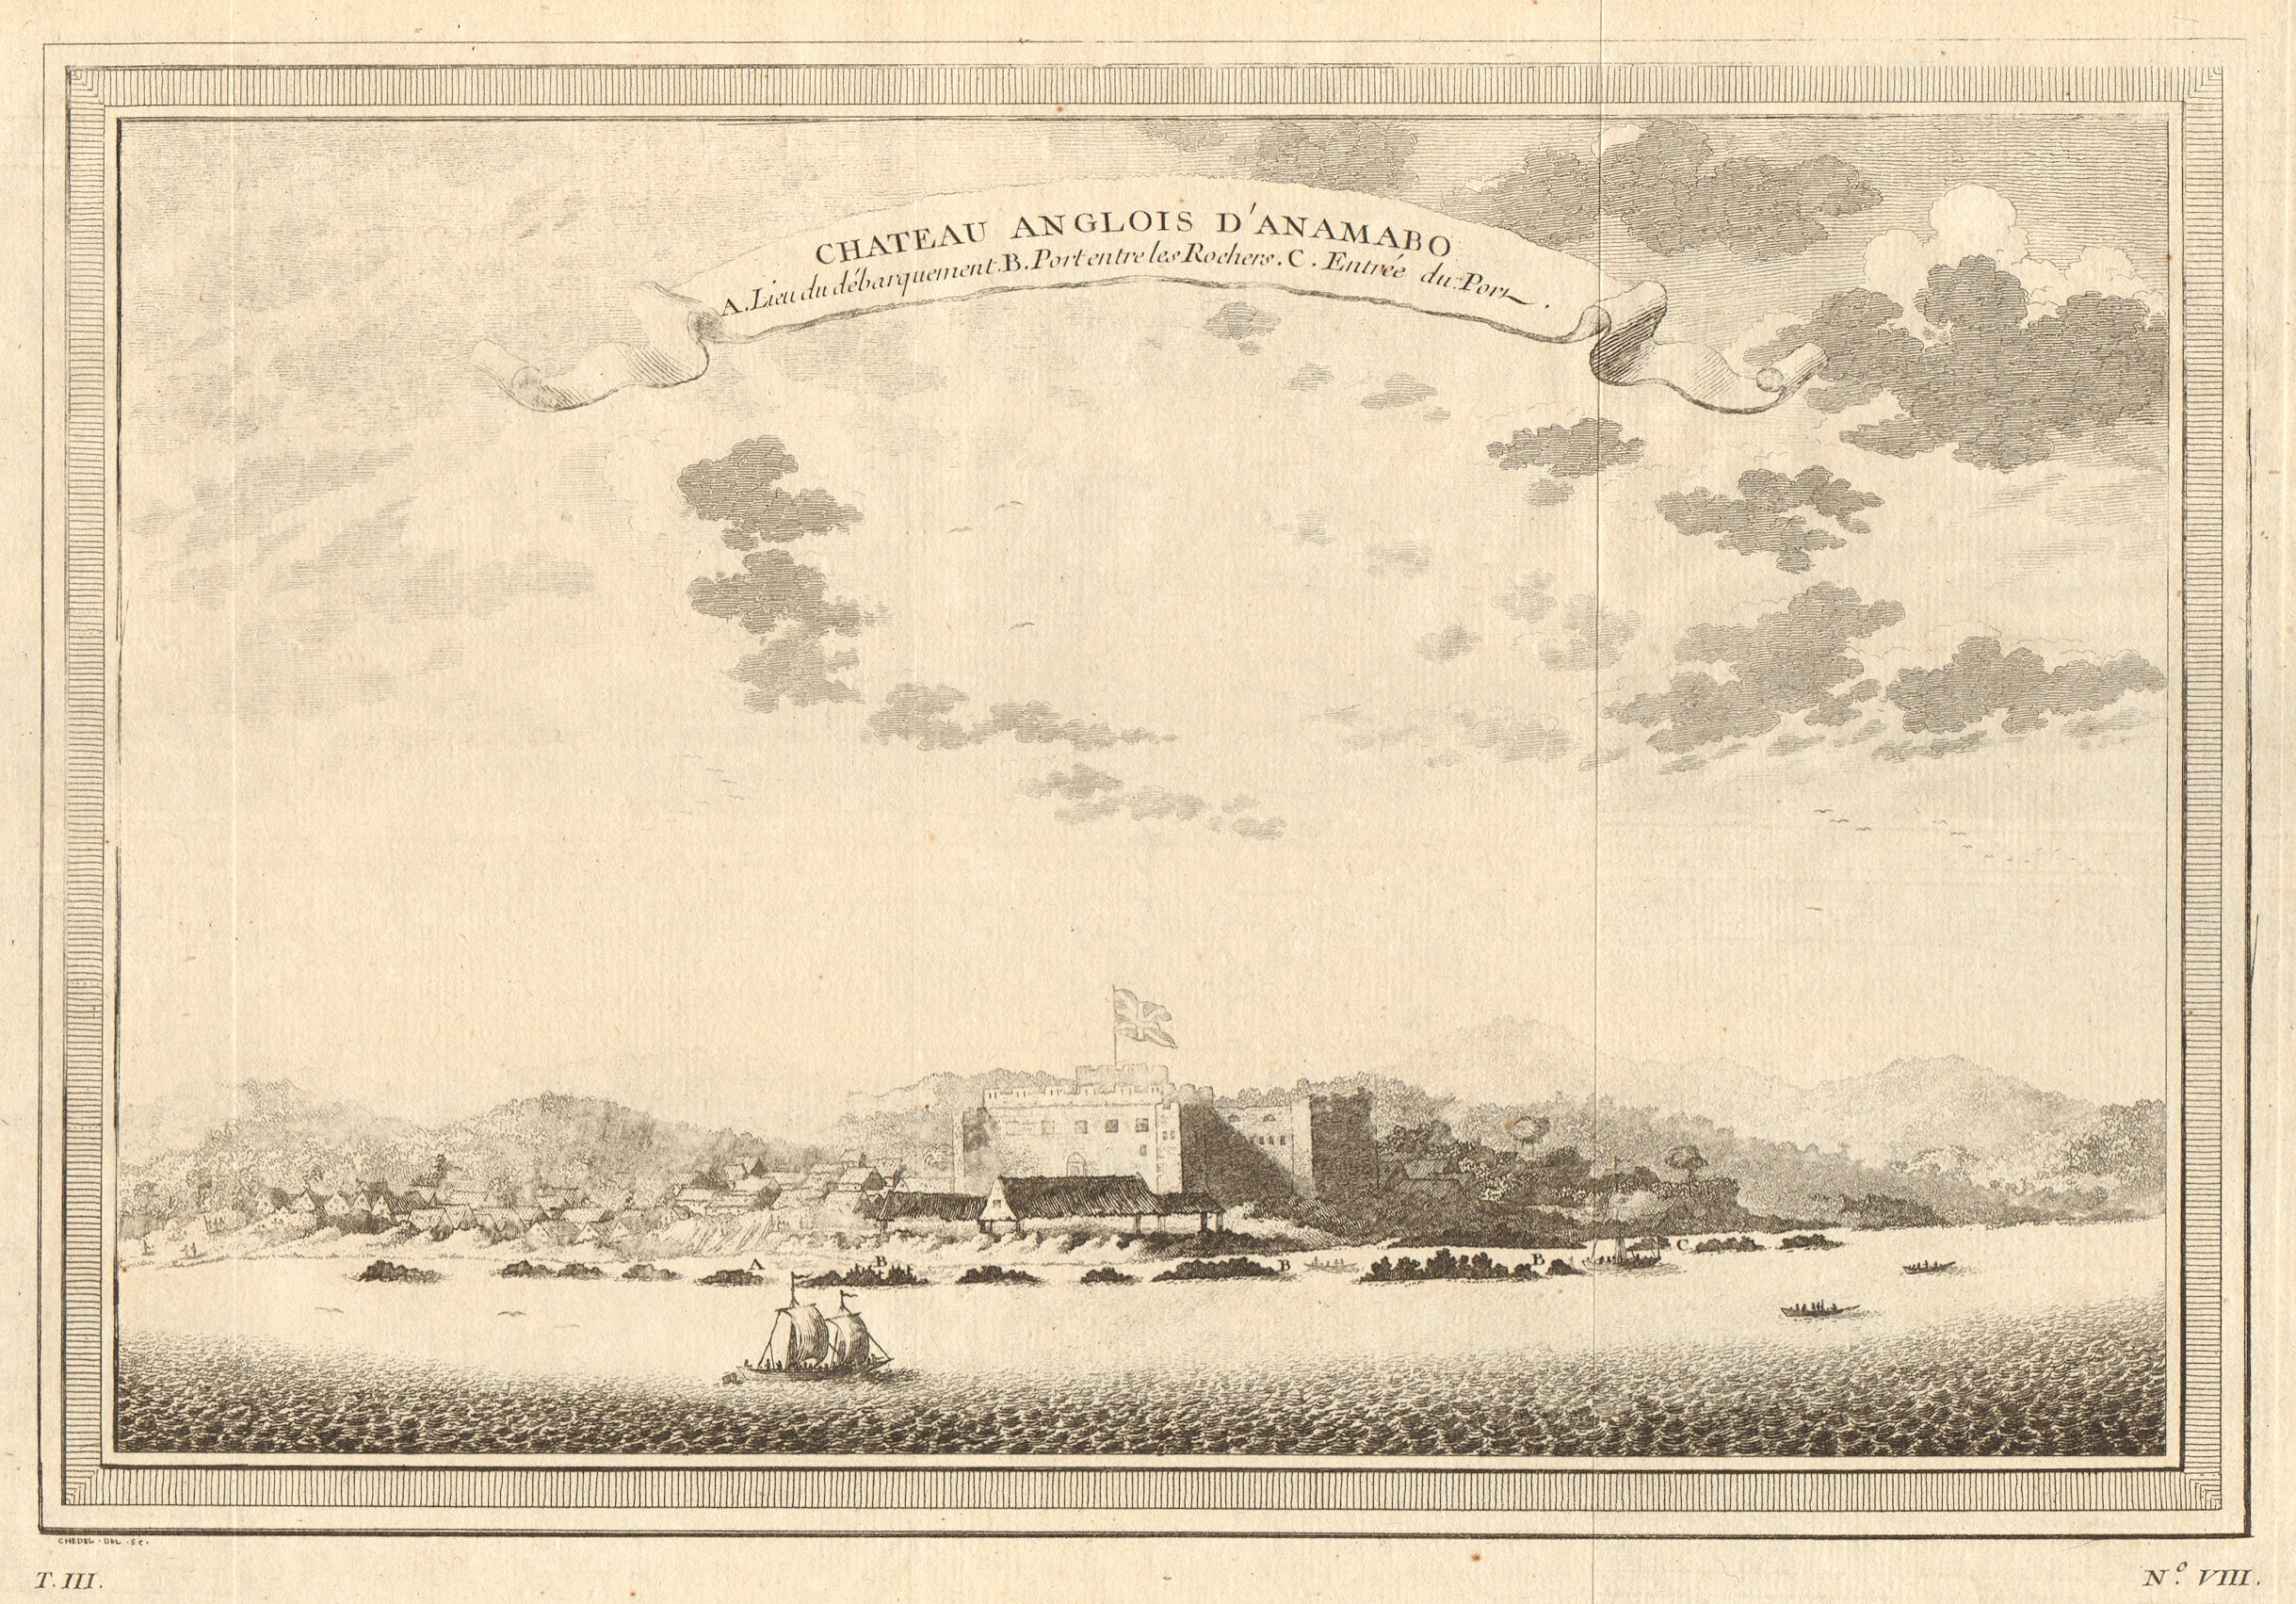 Associate Product 'Chateau Anglois d’Anamabo'. Fort Charles (now Ft William), Anomabu, Ghana 1747